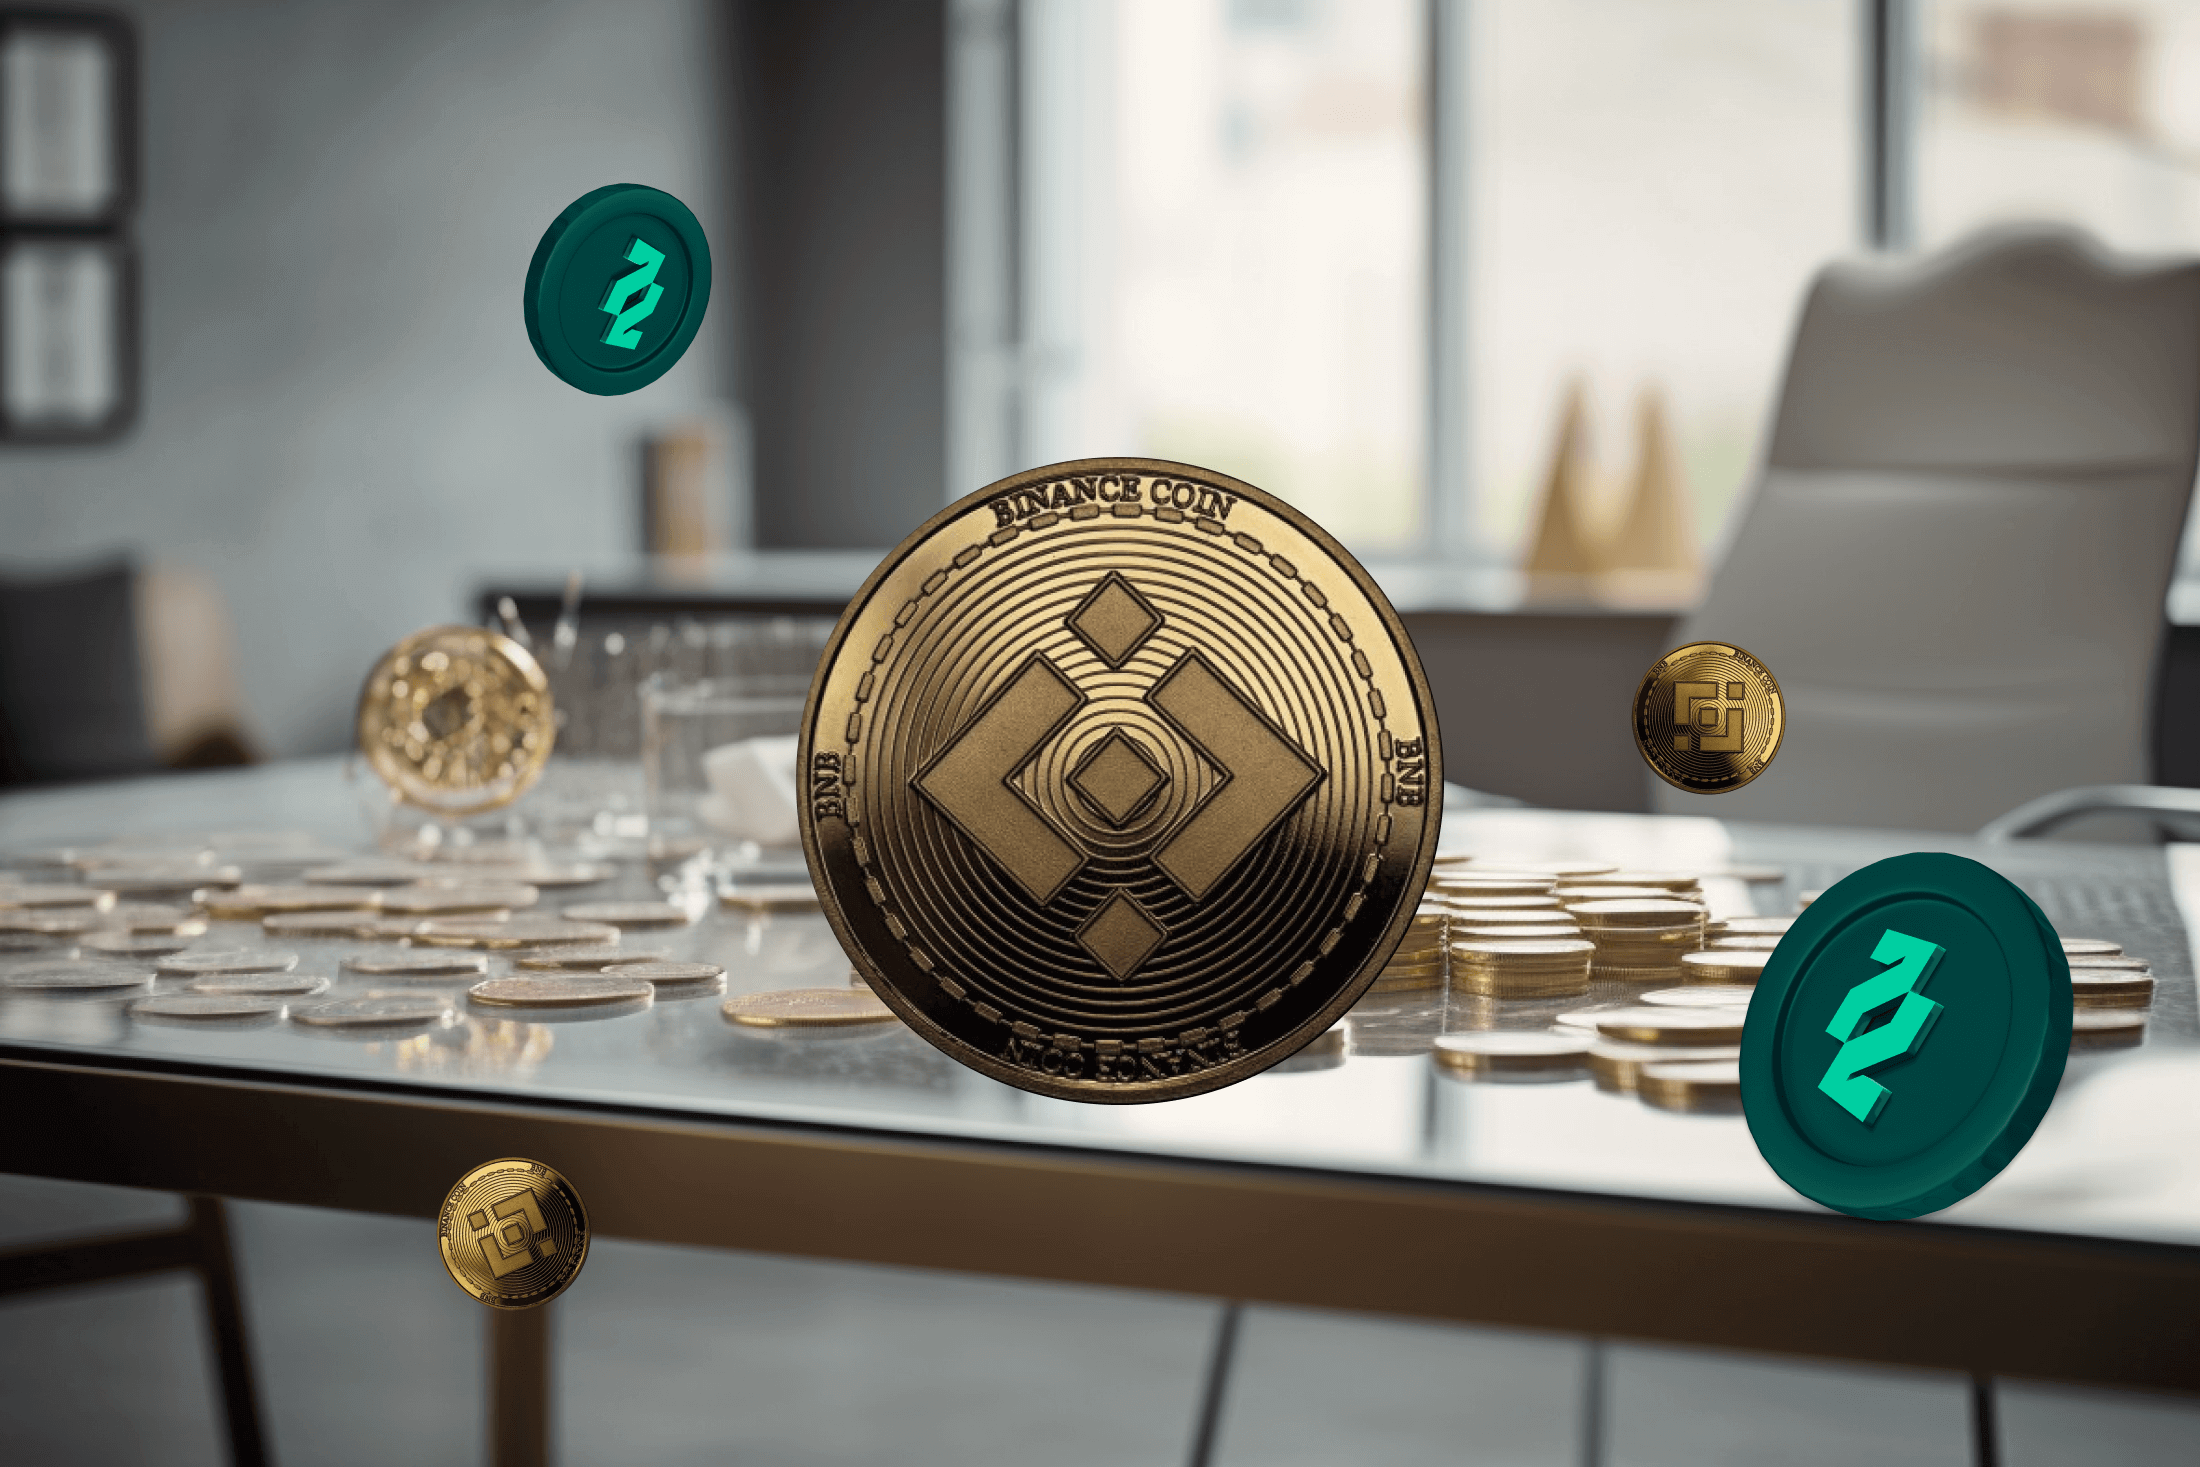 Centralized exchanges Binance coin and OKB in the red as decentralized exchanges  Tradecurve price surges 50%